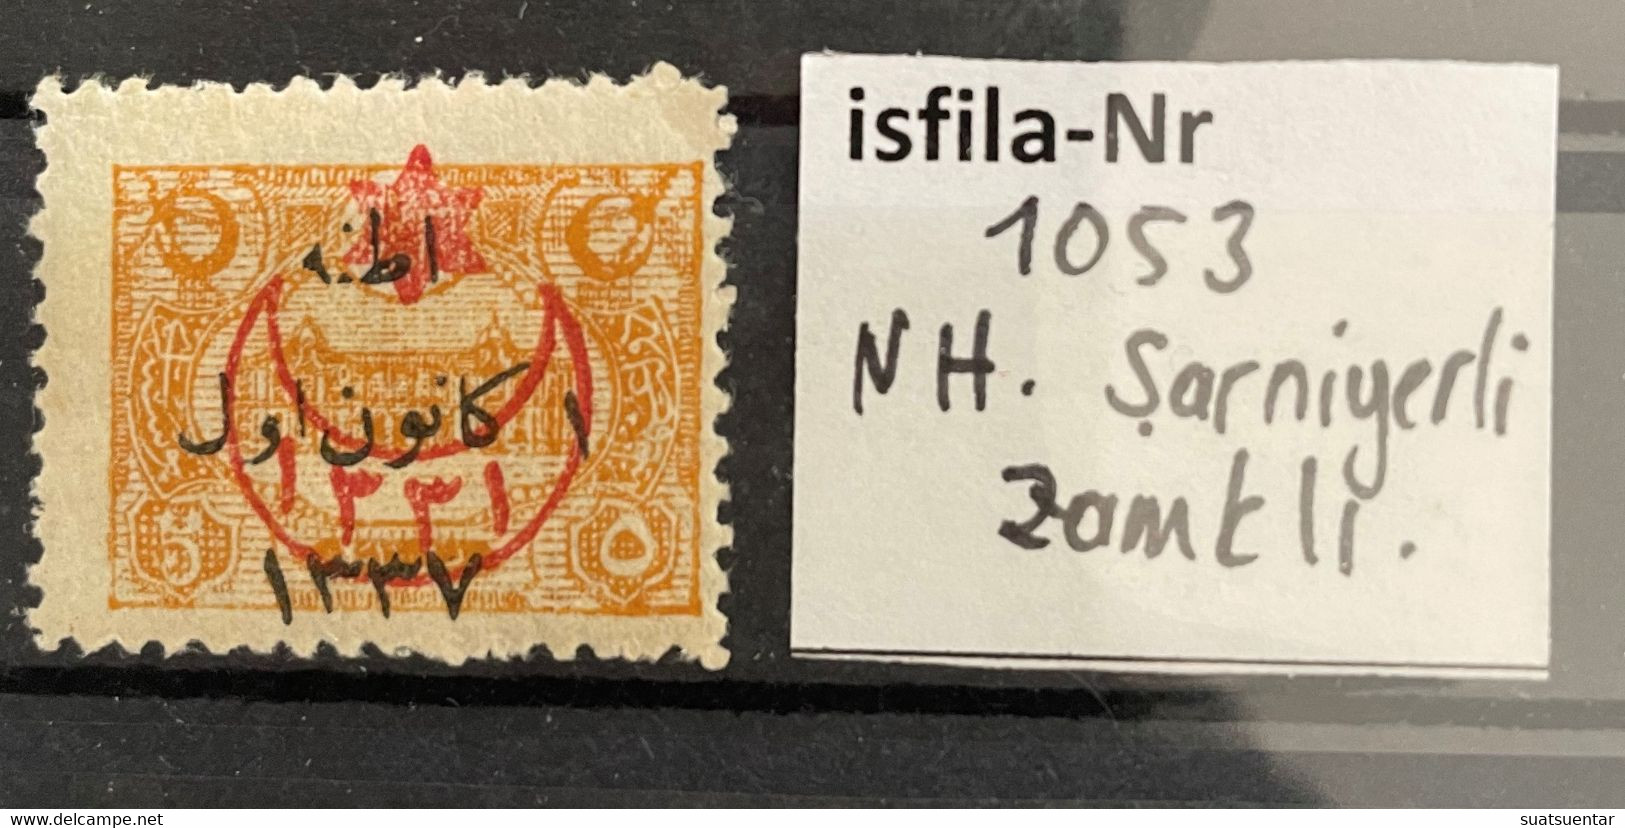 1. Adana Overprinted Issue NH (with Gum)  Isfila.1053 - Unused Stamps